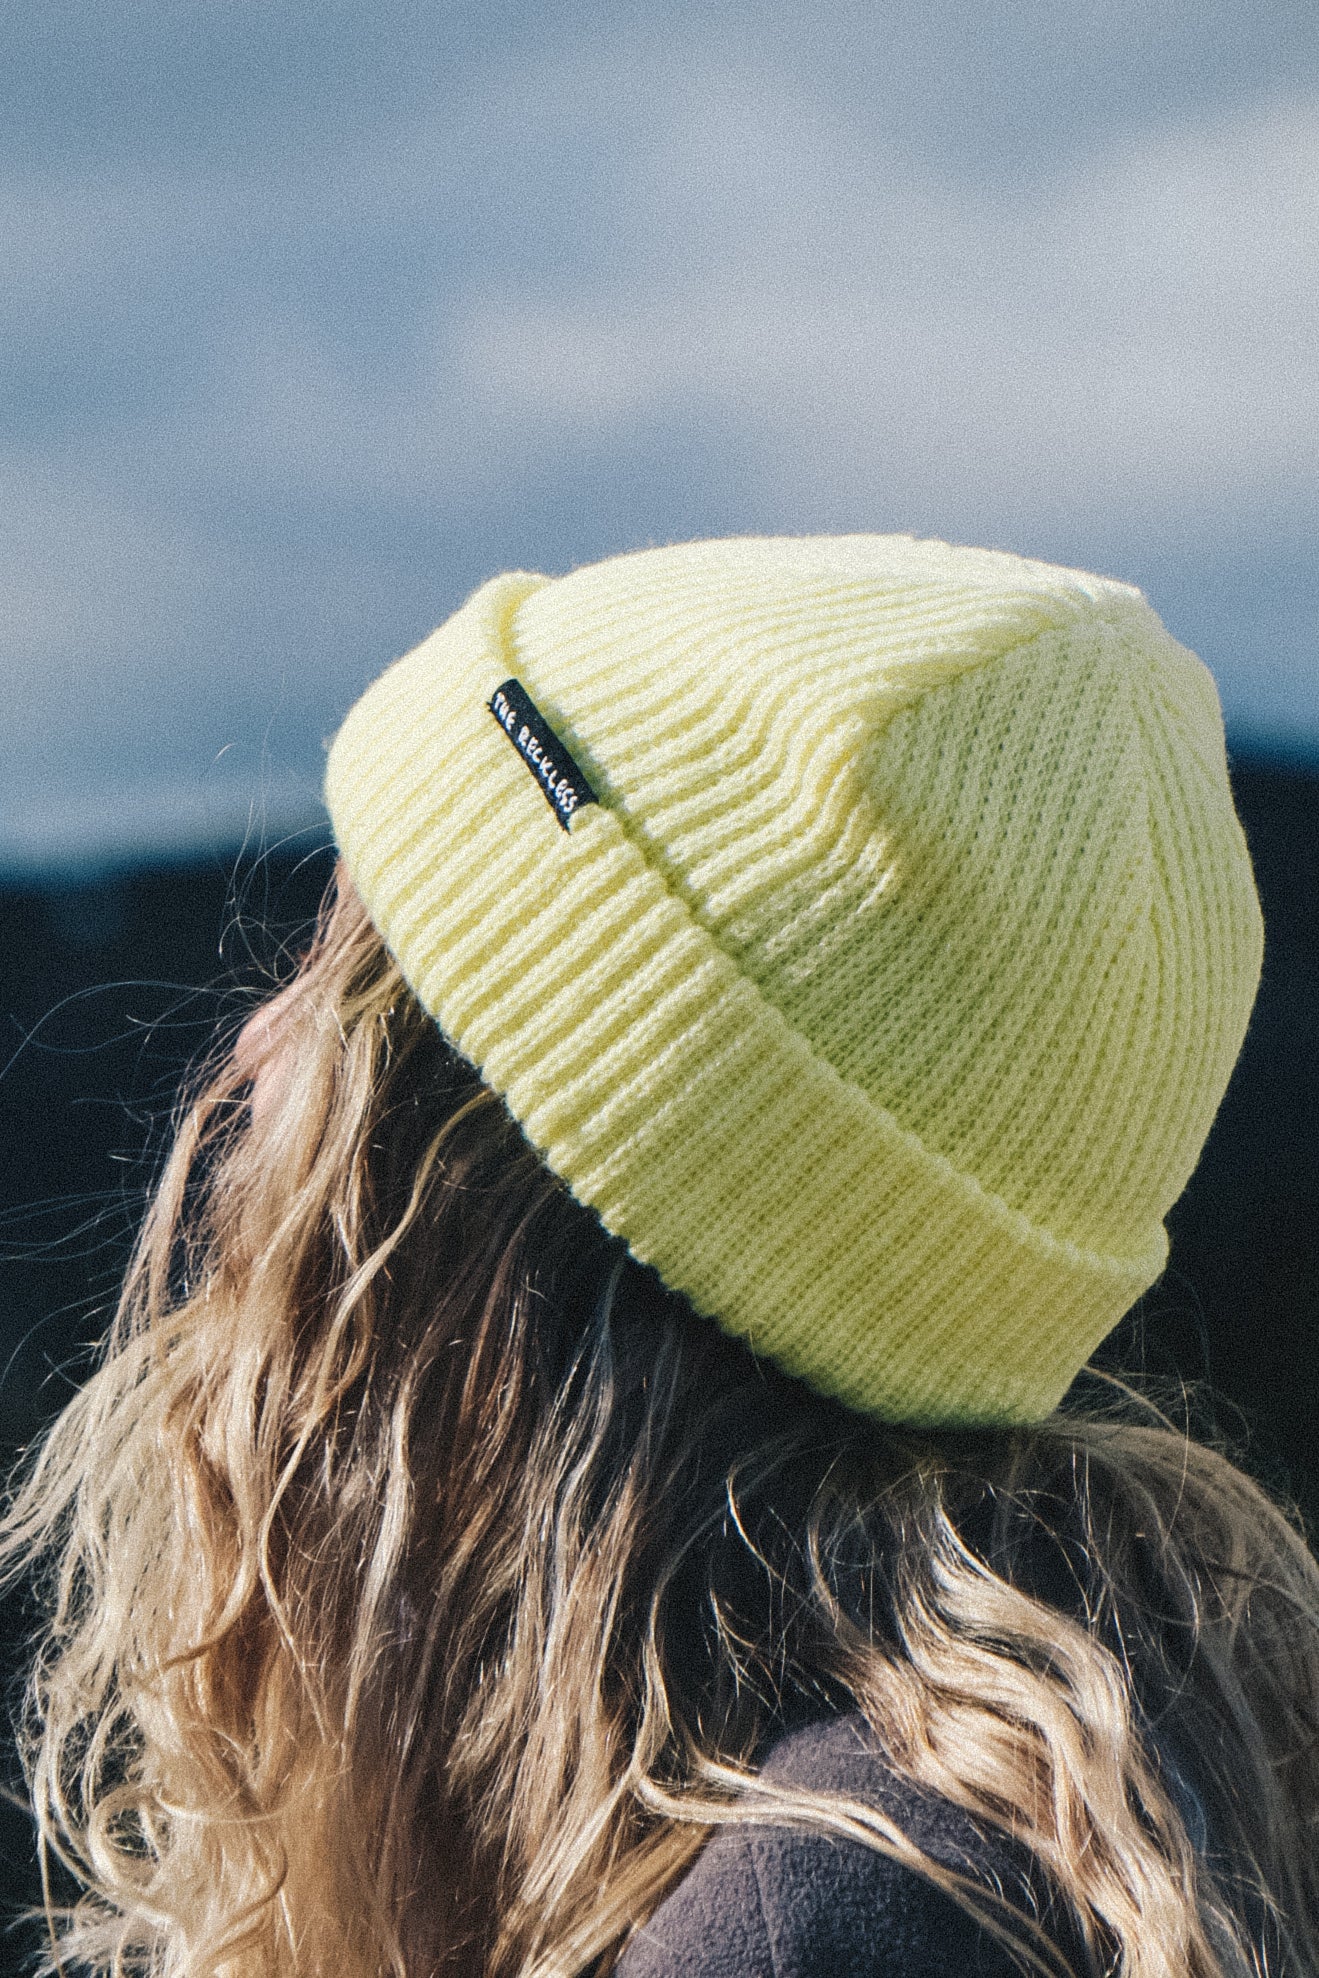 Load image into Gallery viewer, Neon Yellow Beanie
